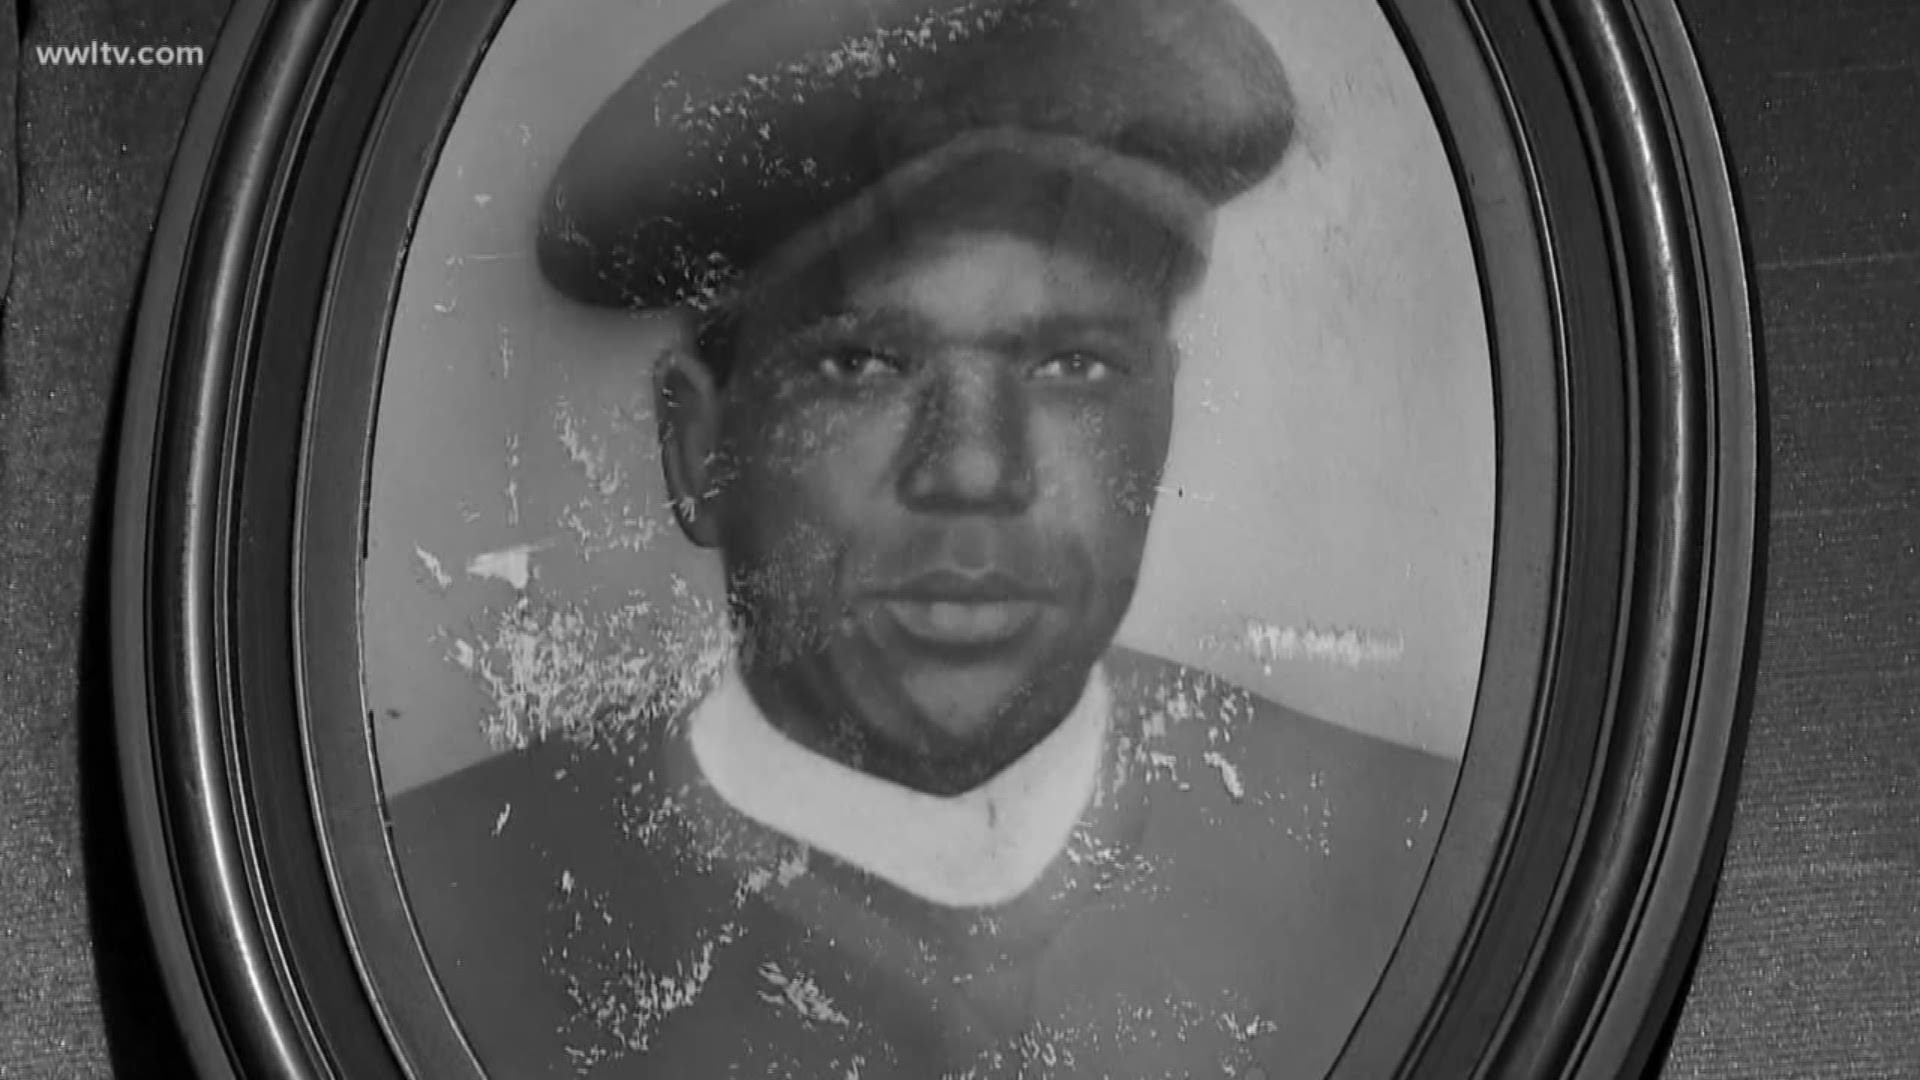 In 1948, Royal Cyril Brooks was shot and killed by a police officer as he was heading to work. It started when he paid for a woman's five cent bus fare.